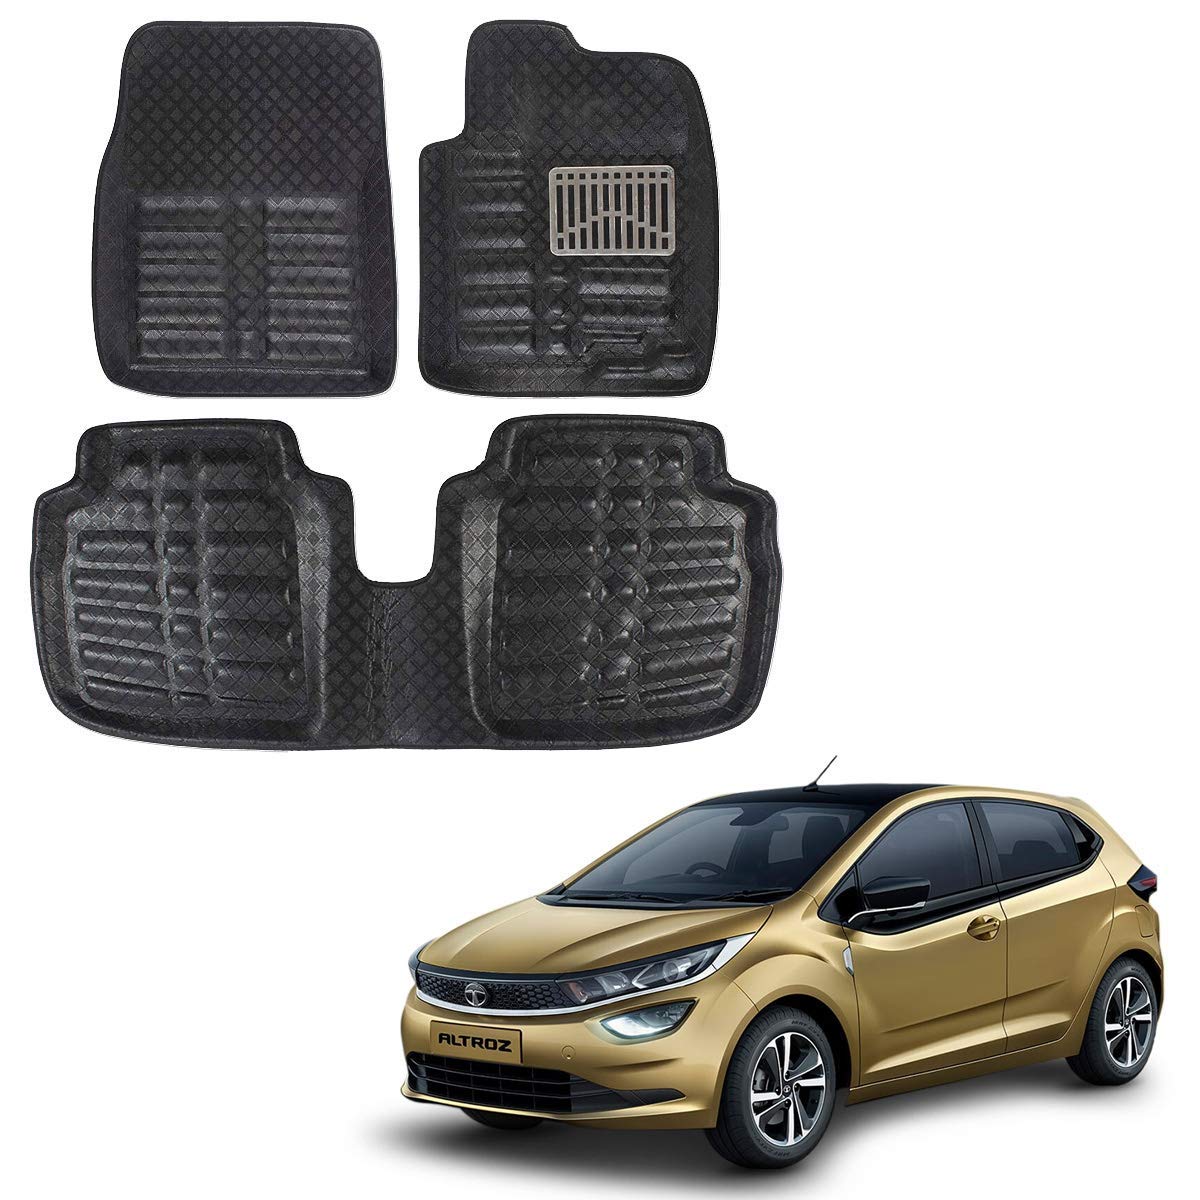 Oshotto 4D Artificial Leather Car Floor Mats For Tata Altroz - Set of 3 (2 pcs Front & one Long Single Rear pc) - Black